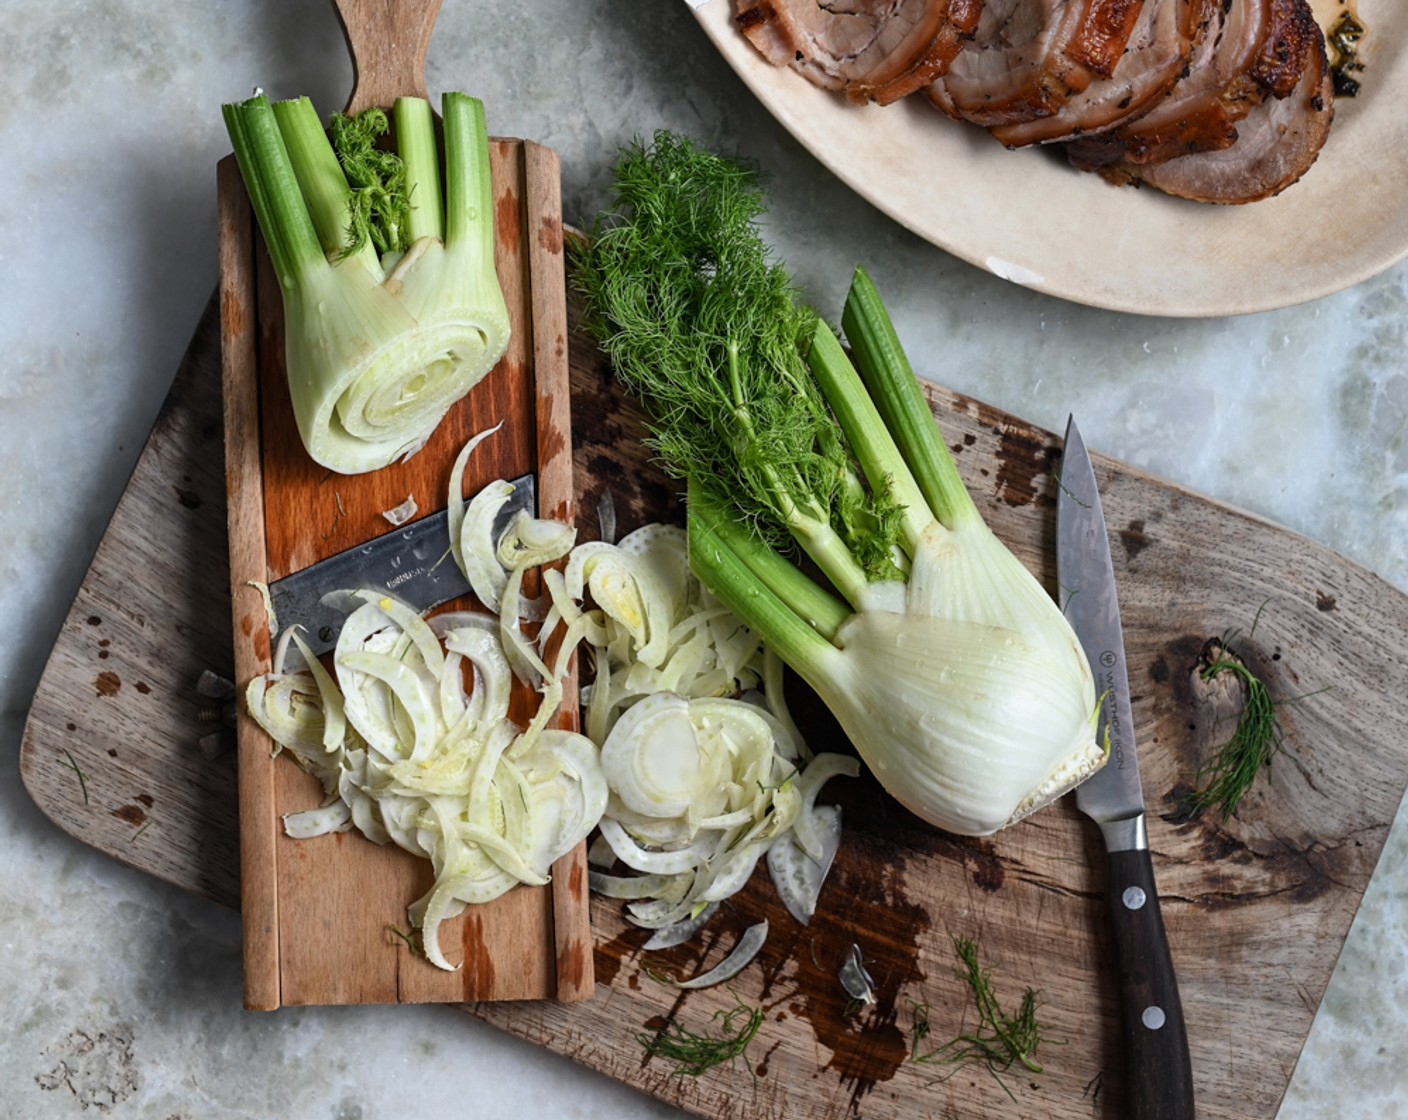 step 11 For the slaw, use a sharp knife to slice the Butter Lettuce (1 head) into ribbons and thinly cut the Fennel Bulb (1). Retain some of the fennel tops to use in the slaw. Combine the lettuce and fennel in a bowl and drizzle over some olive oil.